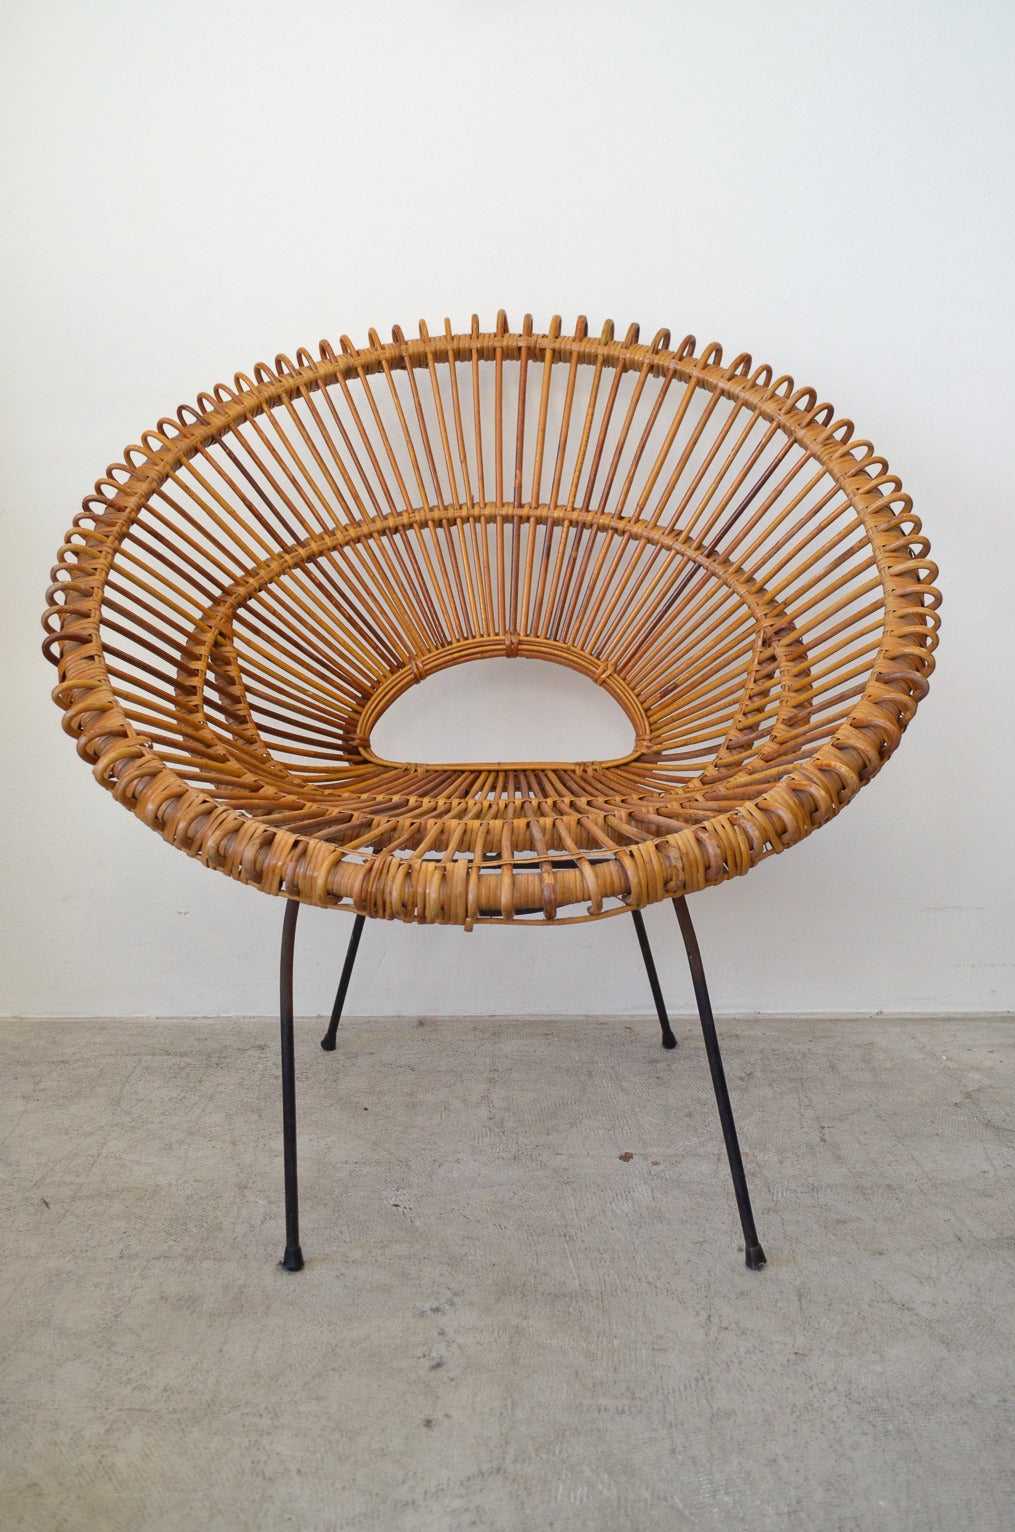 French Rattan and Iron Hoop Chair Attributed to Janine Abraham and Dirk Jan Rol